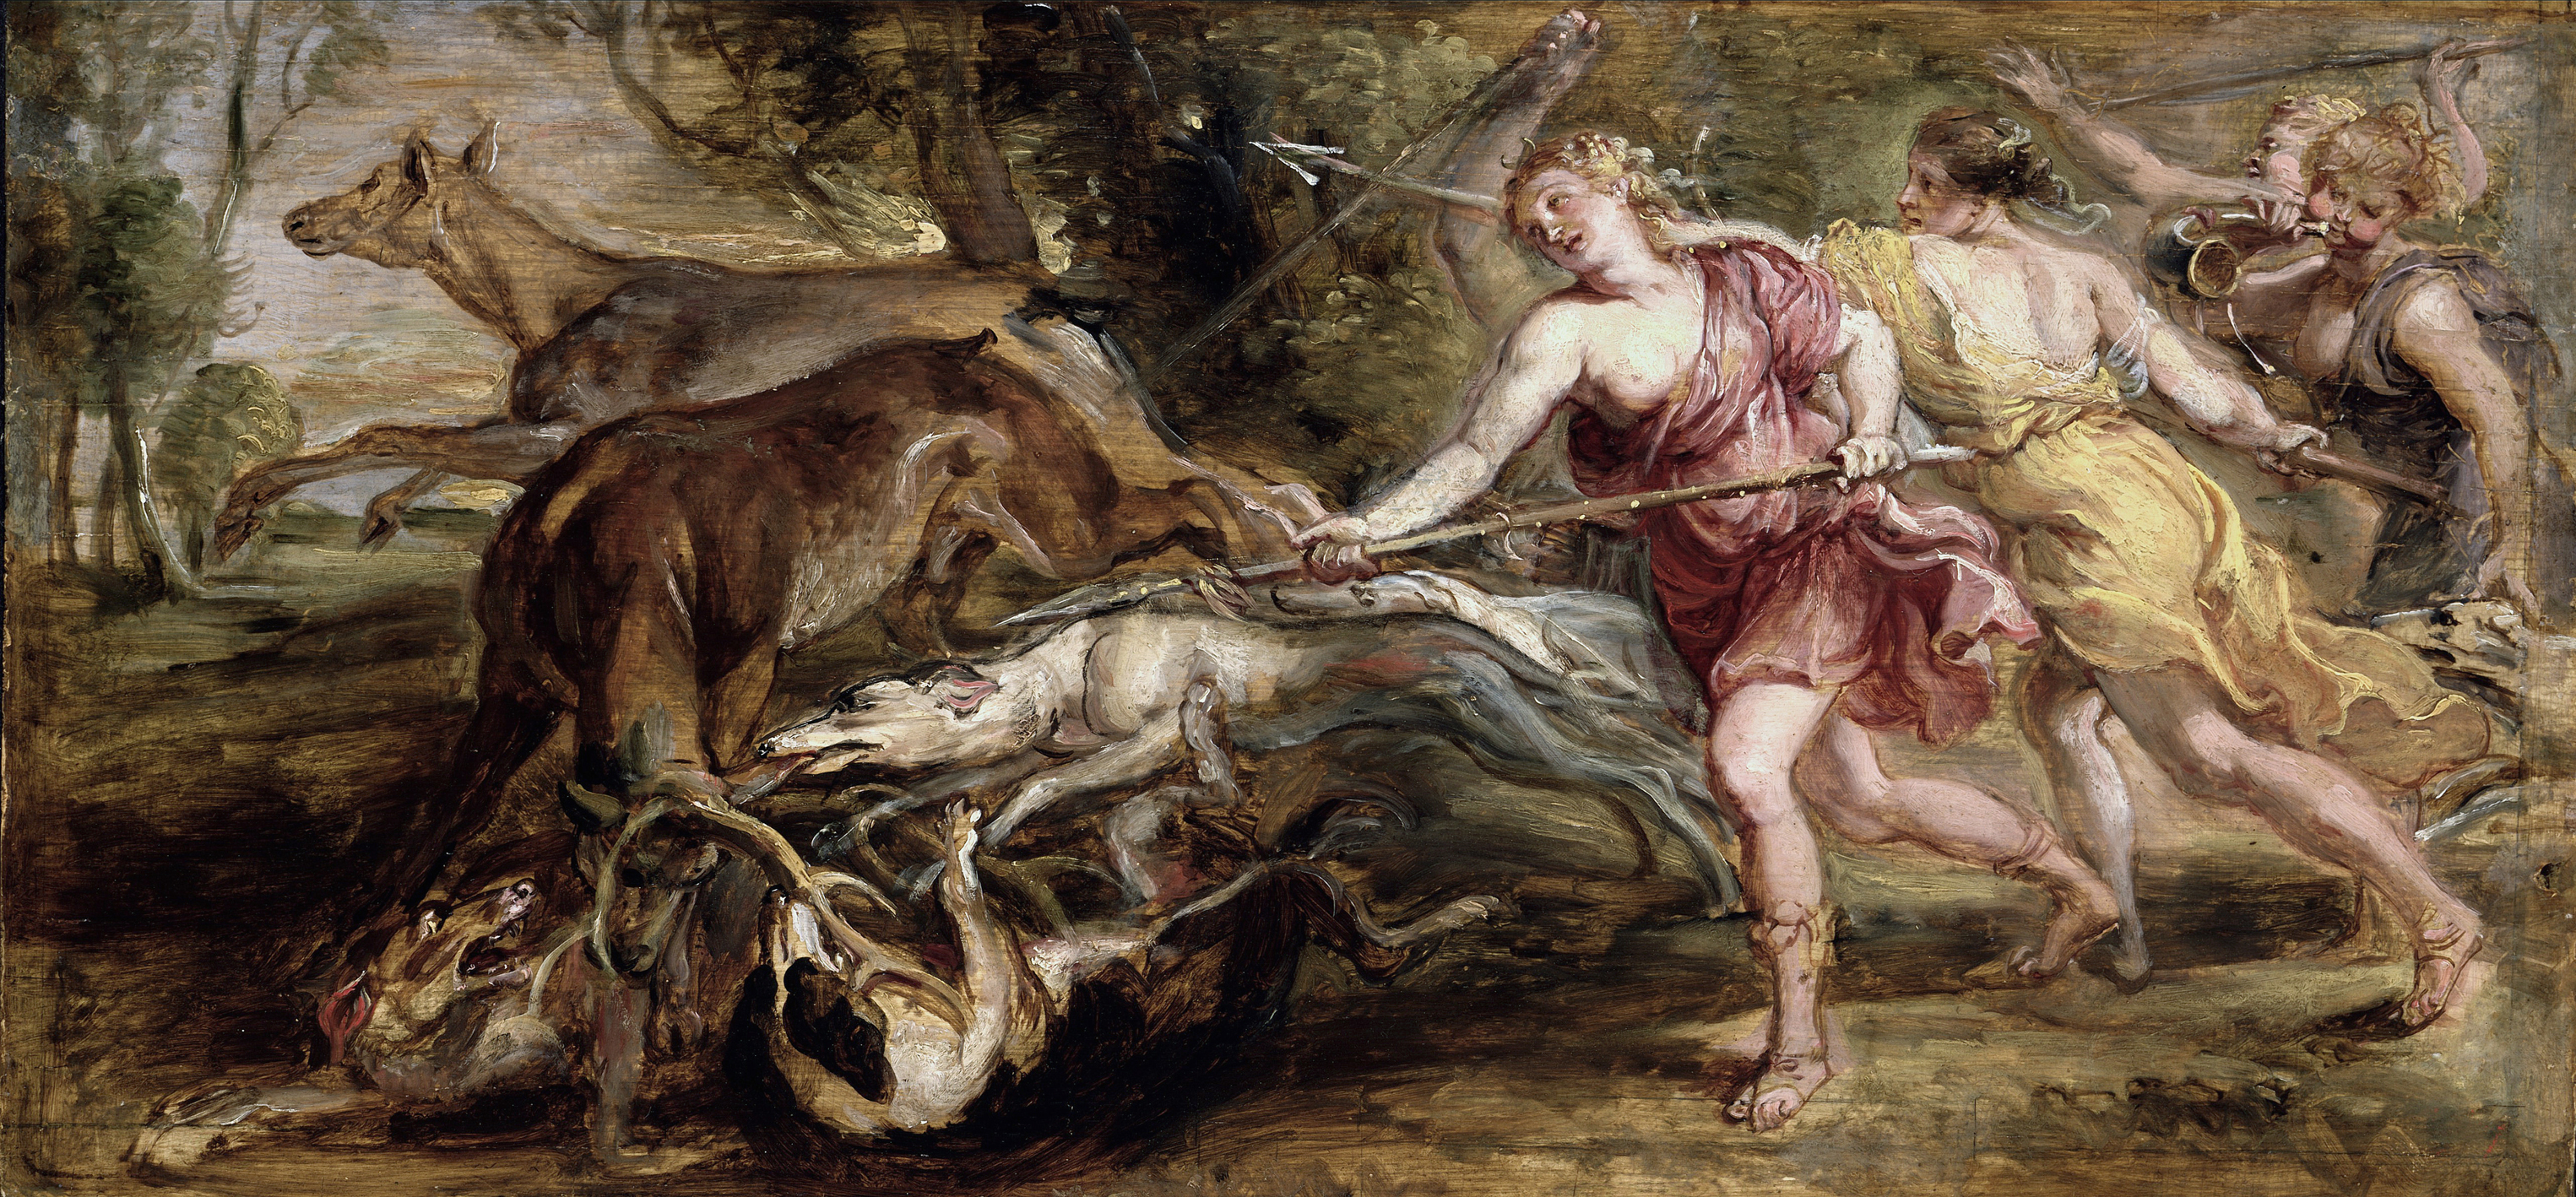 File:Peter Paul Rubens - Diana and her Nymphs, Hunting (1636).jpg -  Wikipedia